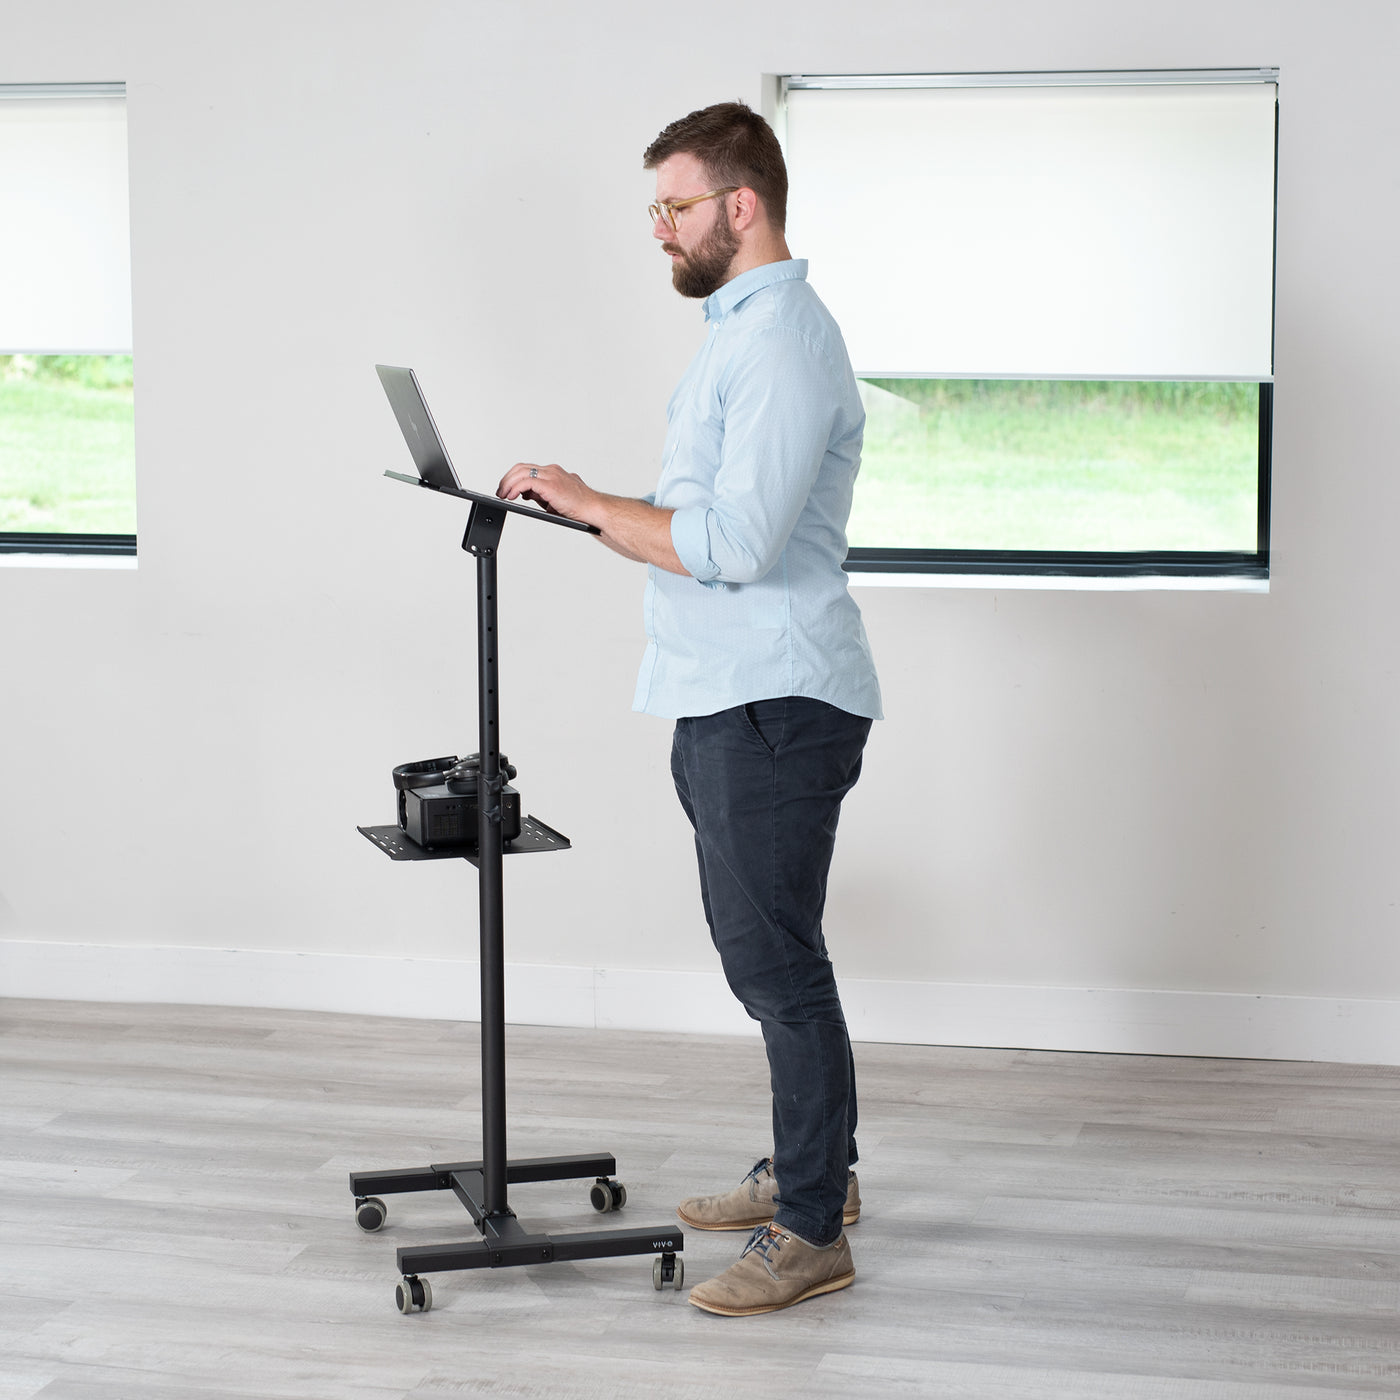 Convenient mobile projector and laptop cart.